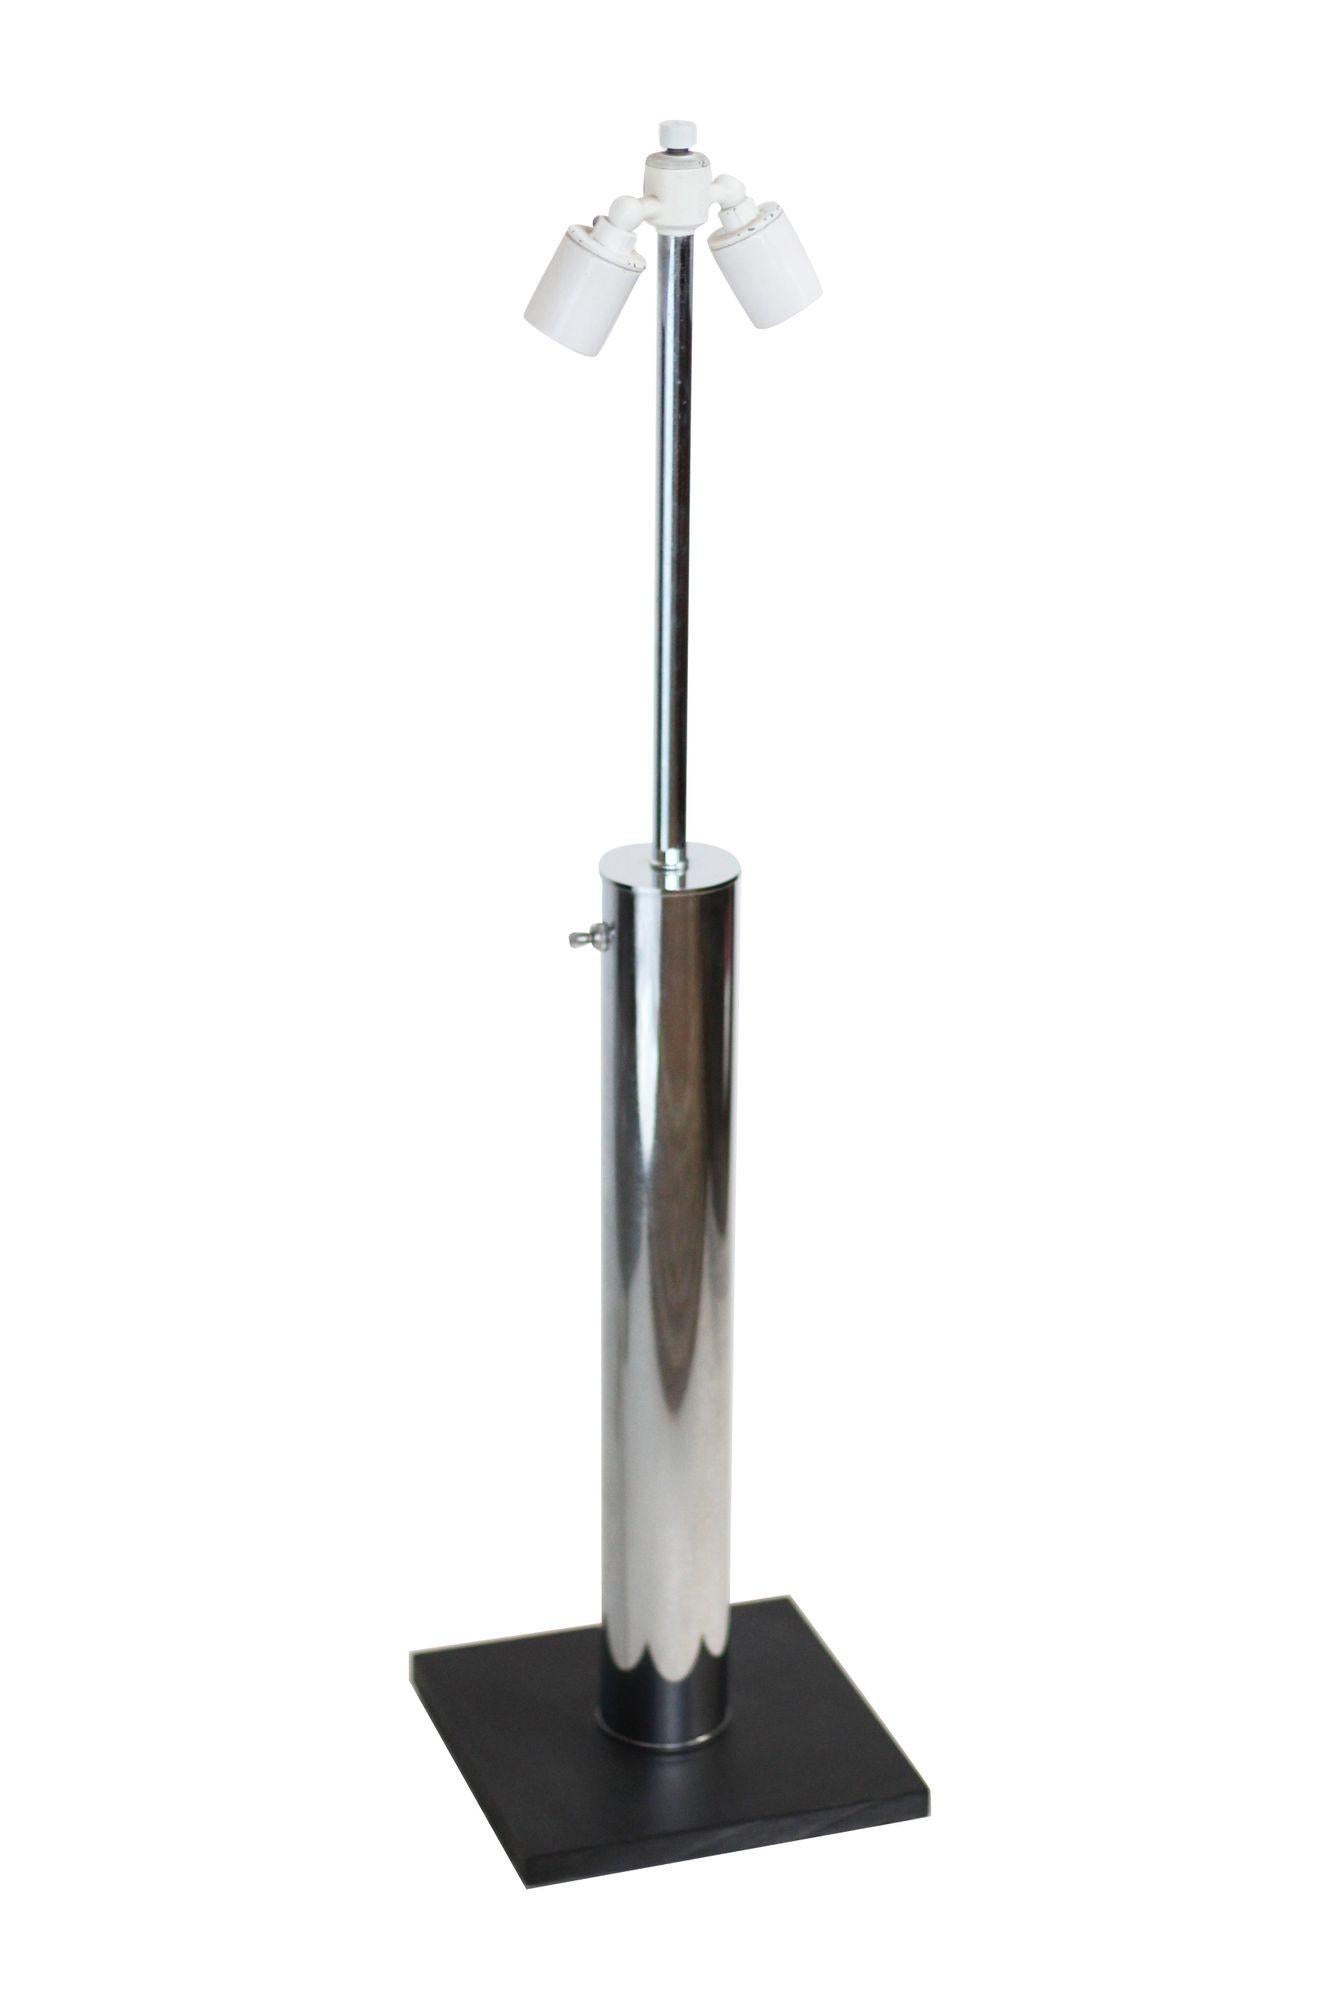 USA, 1970s
 
Minimalist table lamp by Nessen Lighting with a slate base and chrome stem. Perfectly reduced form. Double headed socket. Original wiring is in working condition.
 
Dimensions: 8